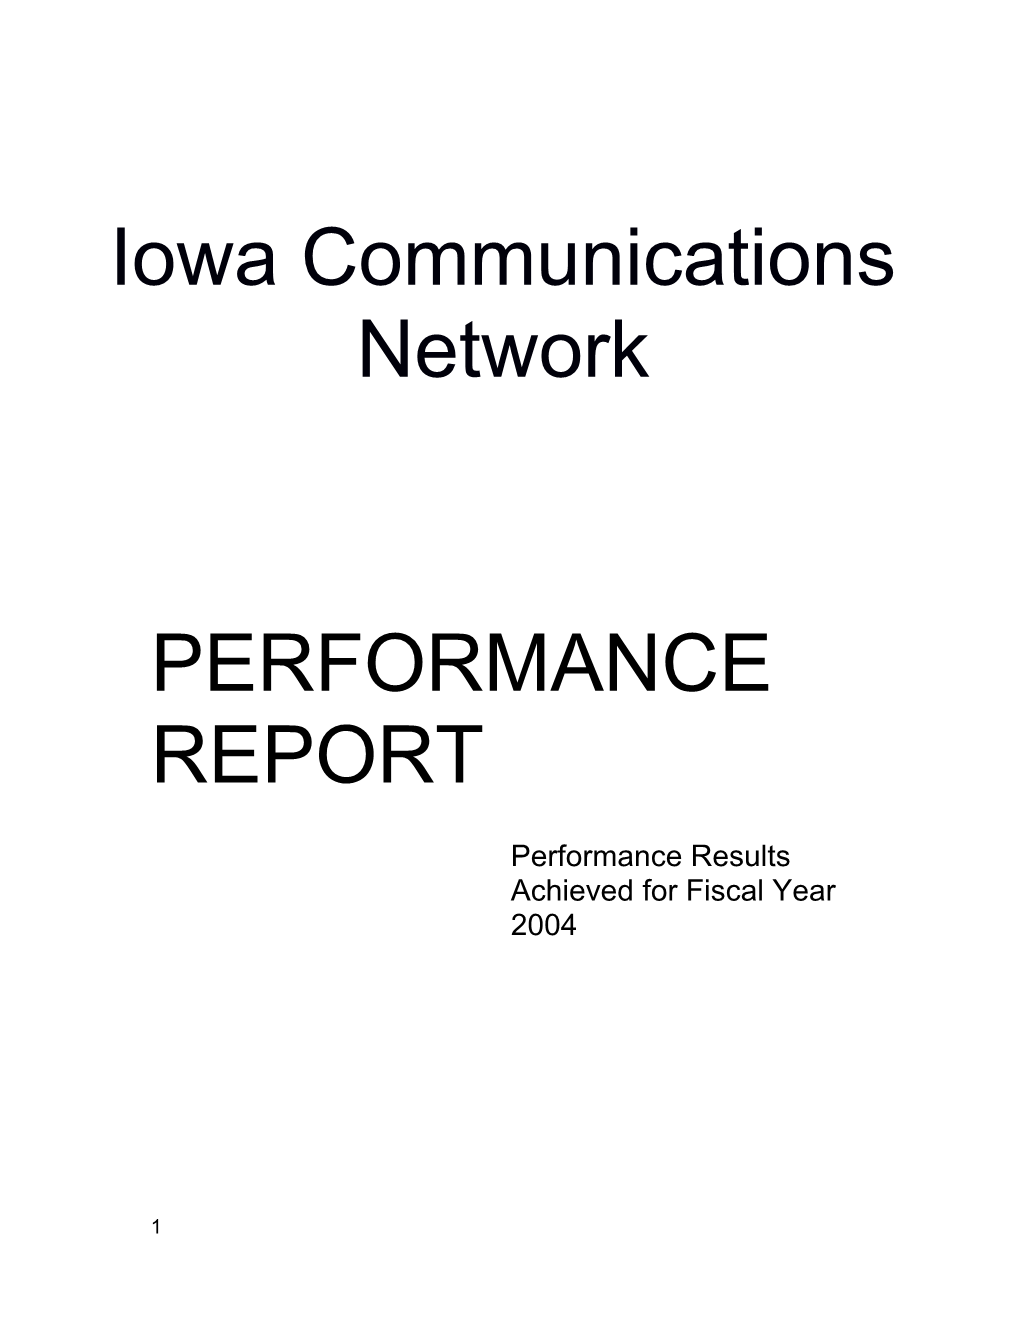 Performance Results Achieved for Fiscal Year 2004